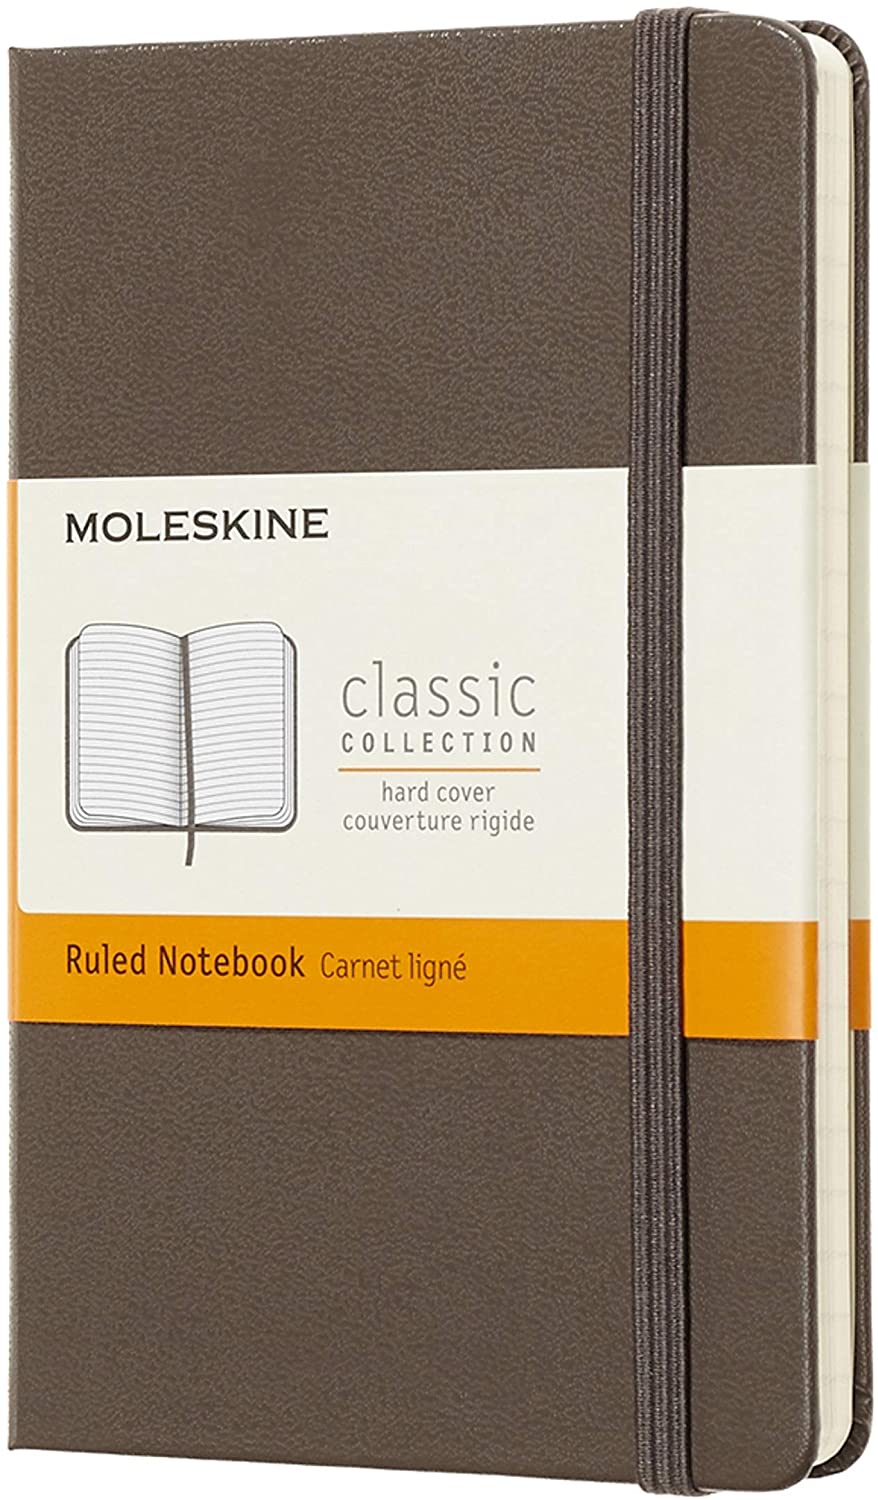 Moleskine Classic Notebook Ruled Brown Hard Cover